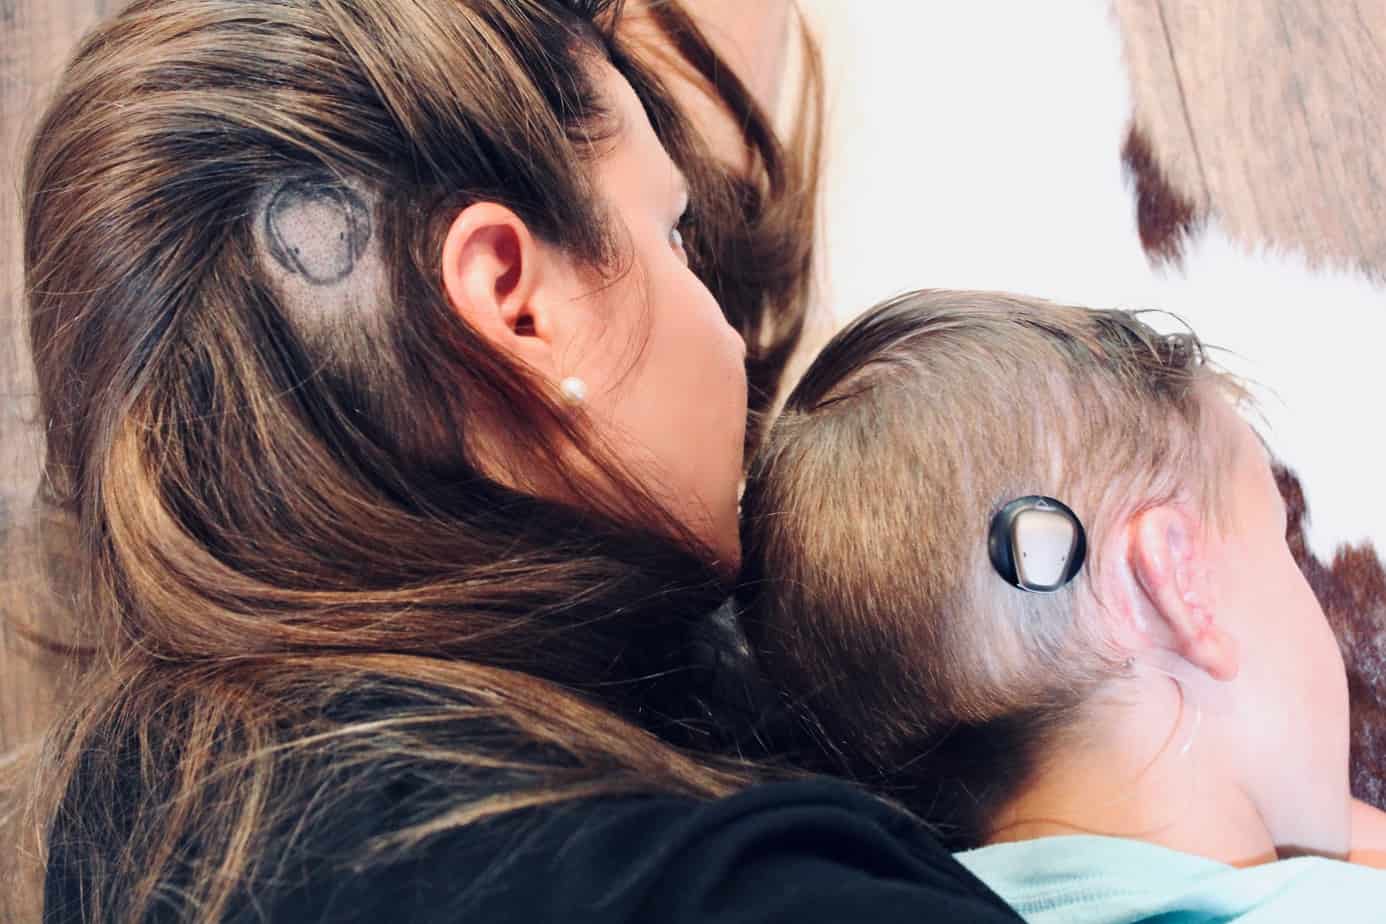 Mom with tattoo celebrating child with ear malformation at birth